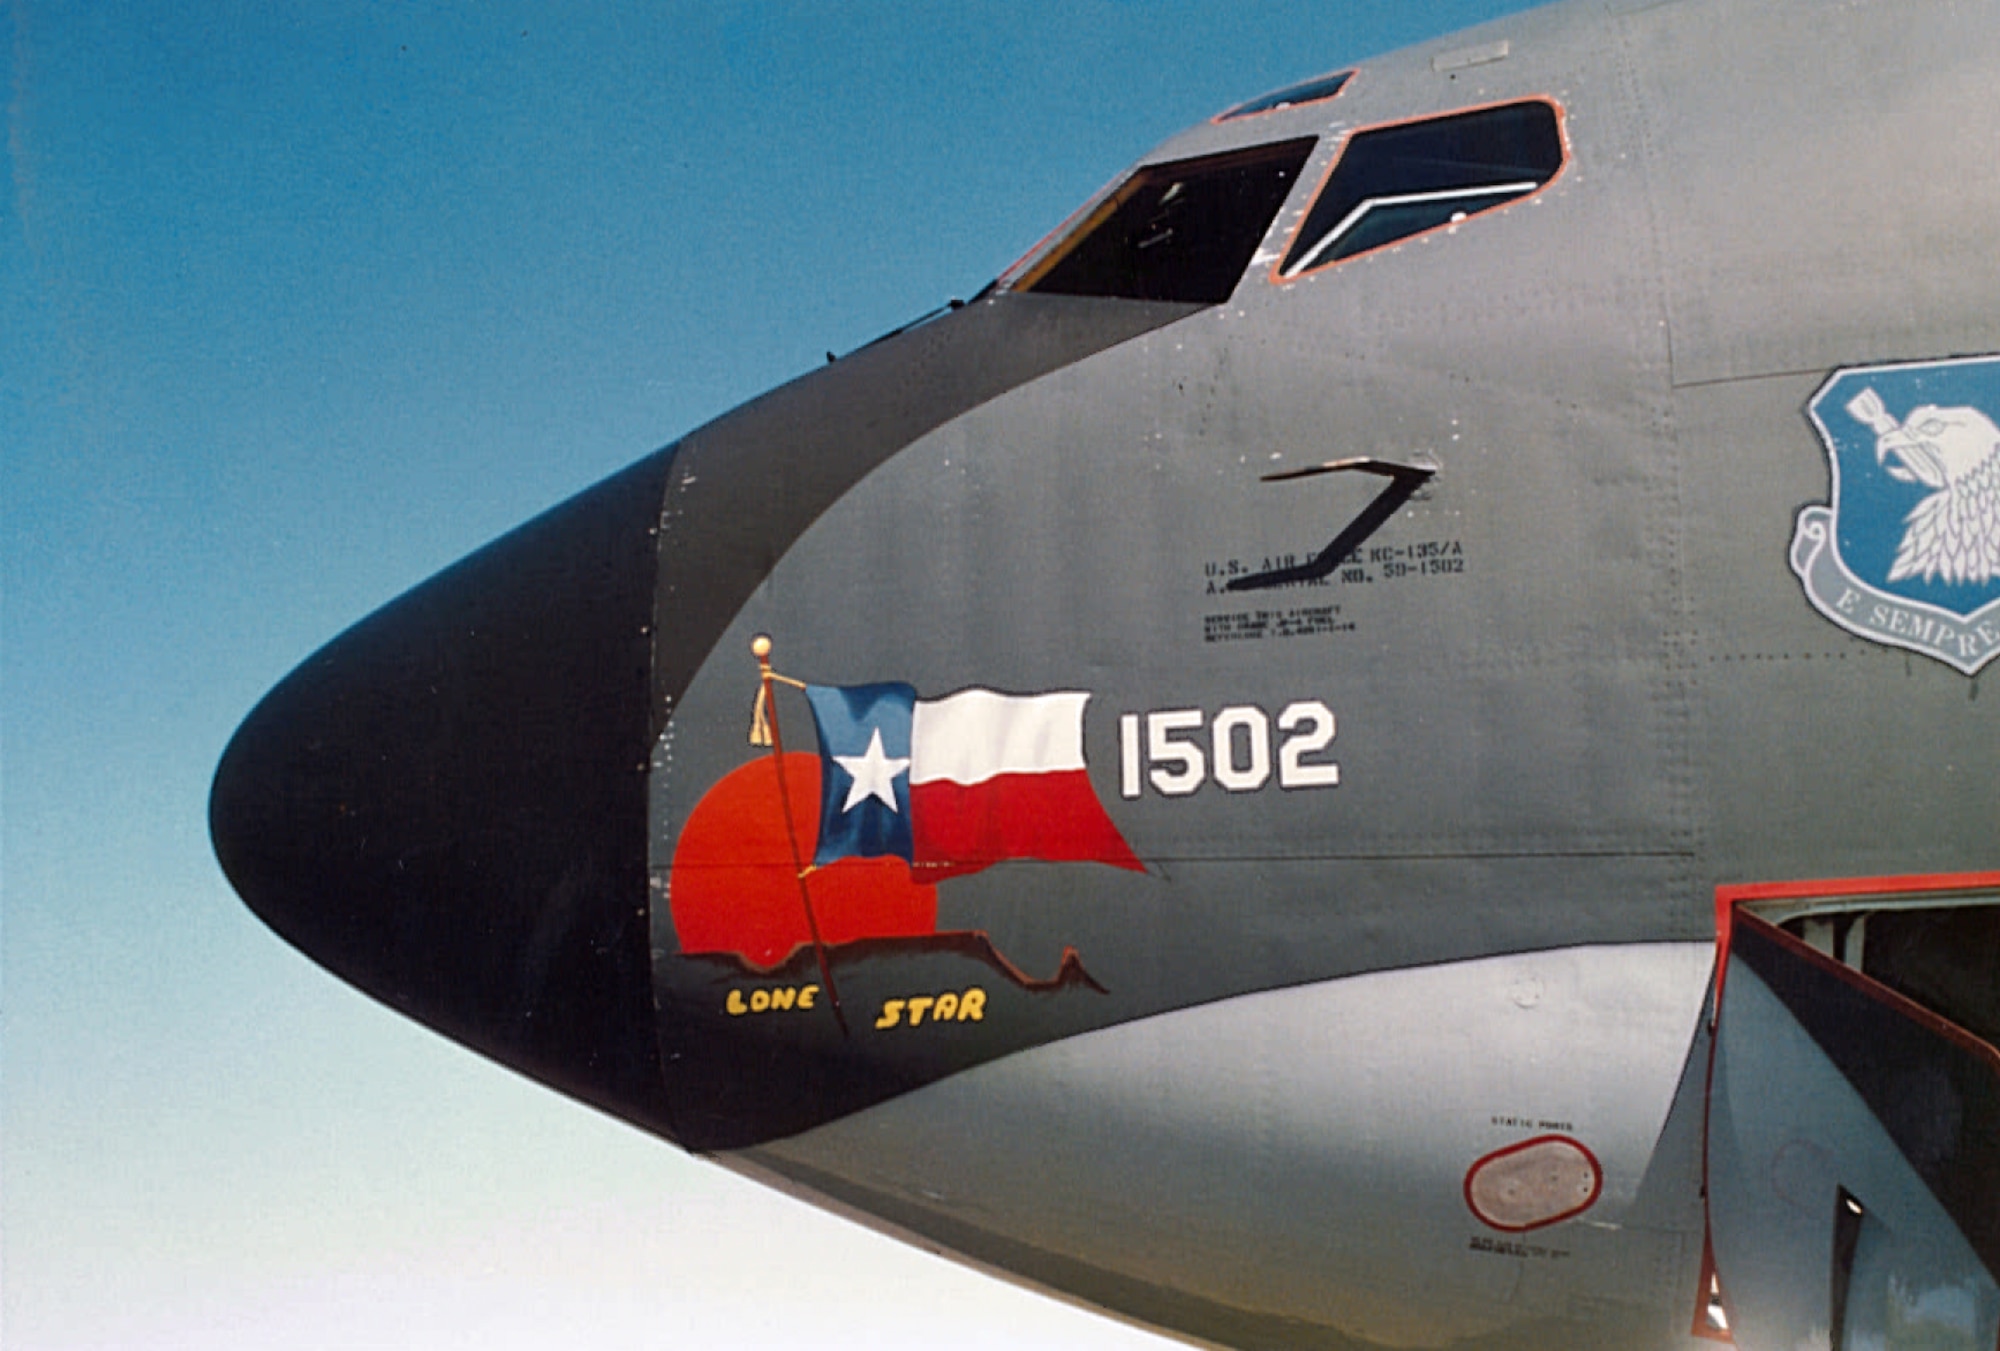 A KC-135 Stratotanker displays the Texas flag on the left side of its body during Operation Desert Storm at Incirlik Air Base, Turkey.  This denotes that the aircraft was from the 917th Air Refueling Squadron at Dyess Air Force Base, Texas. (Courtesy photo)